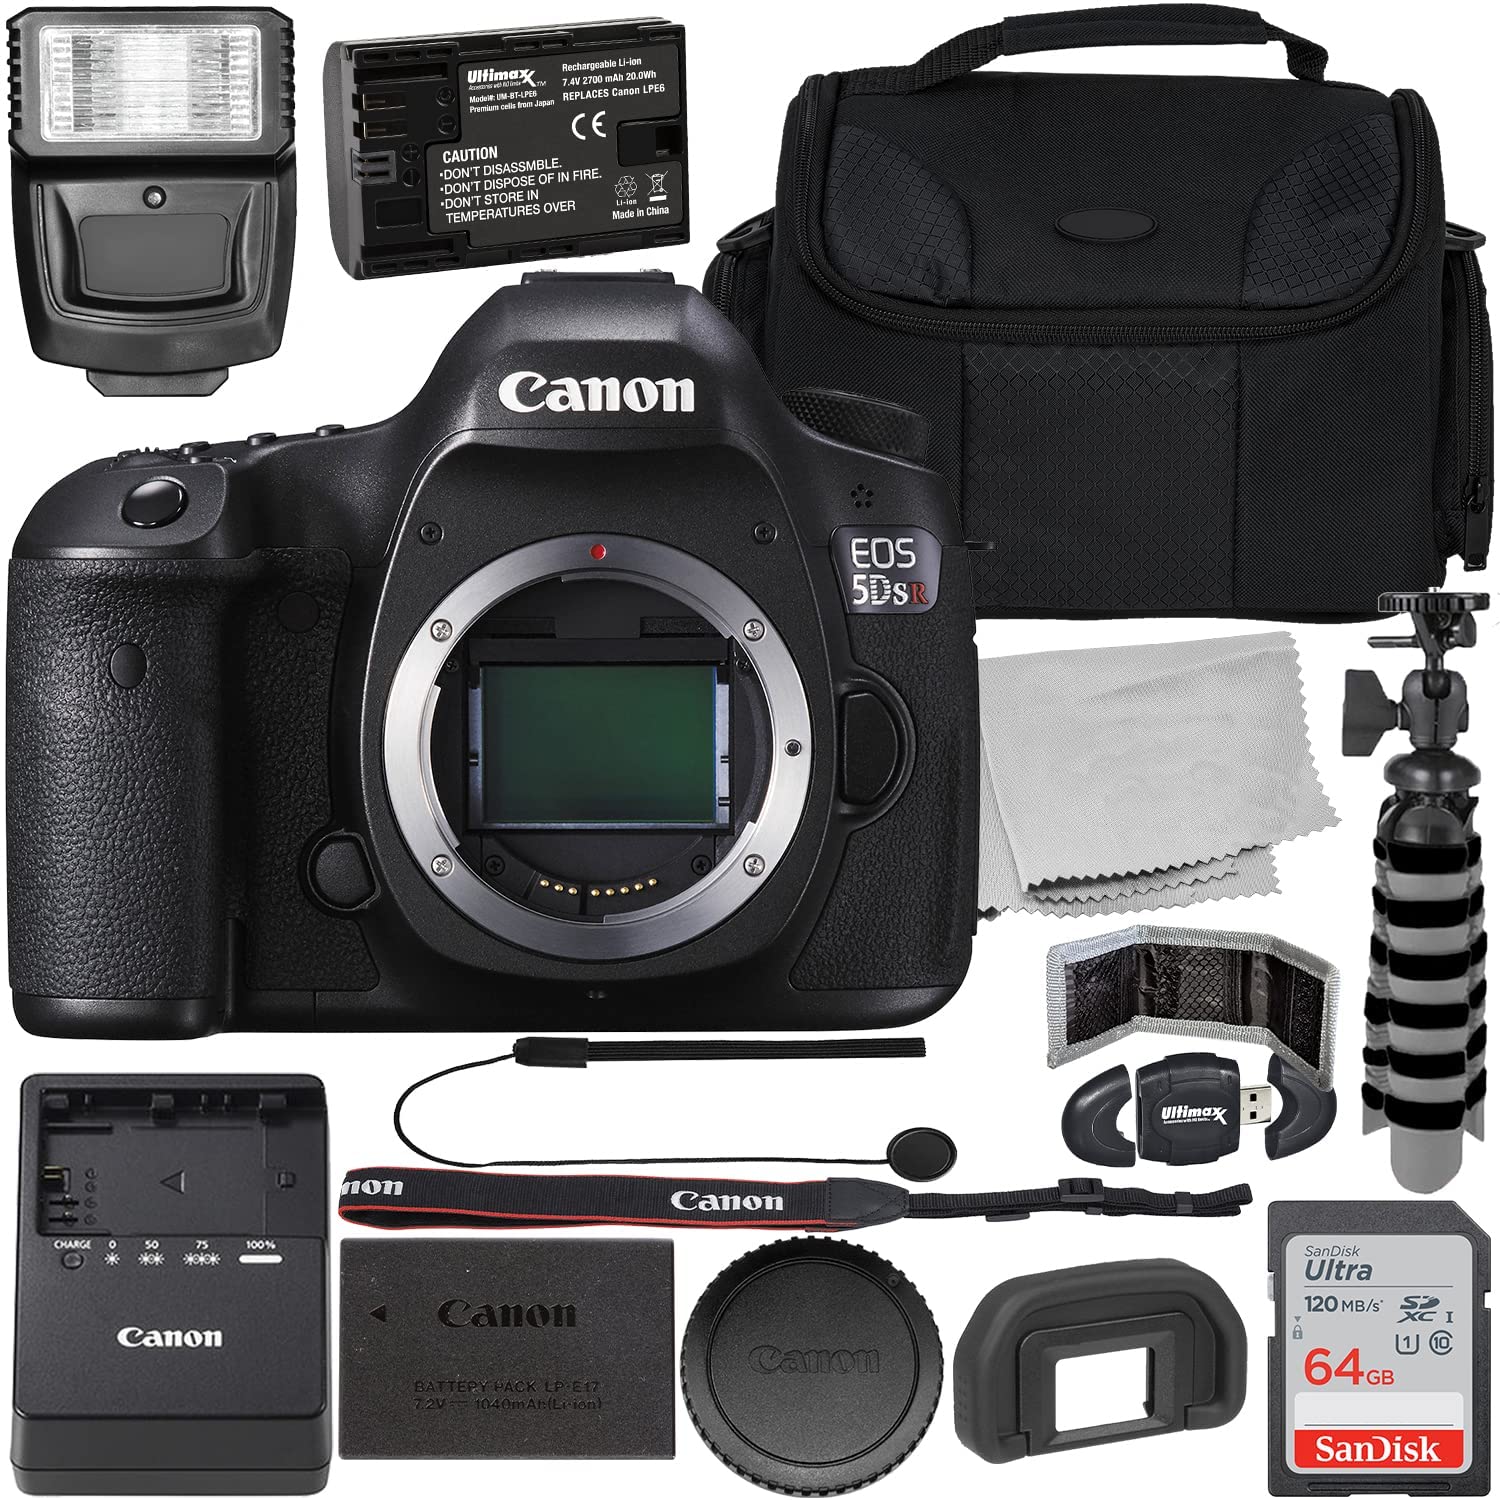 Canon EOS 5DS R DSLR Camera (Body Only) + Ultra 64GB SDXC, Digital Flash with 3 Slave Modes, Extended Life Replacement Battery, Water Resistant Gadget Bag & More (18pc Bundle)